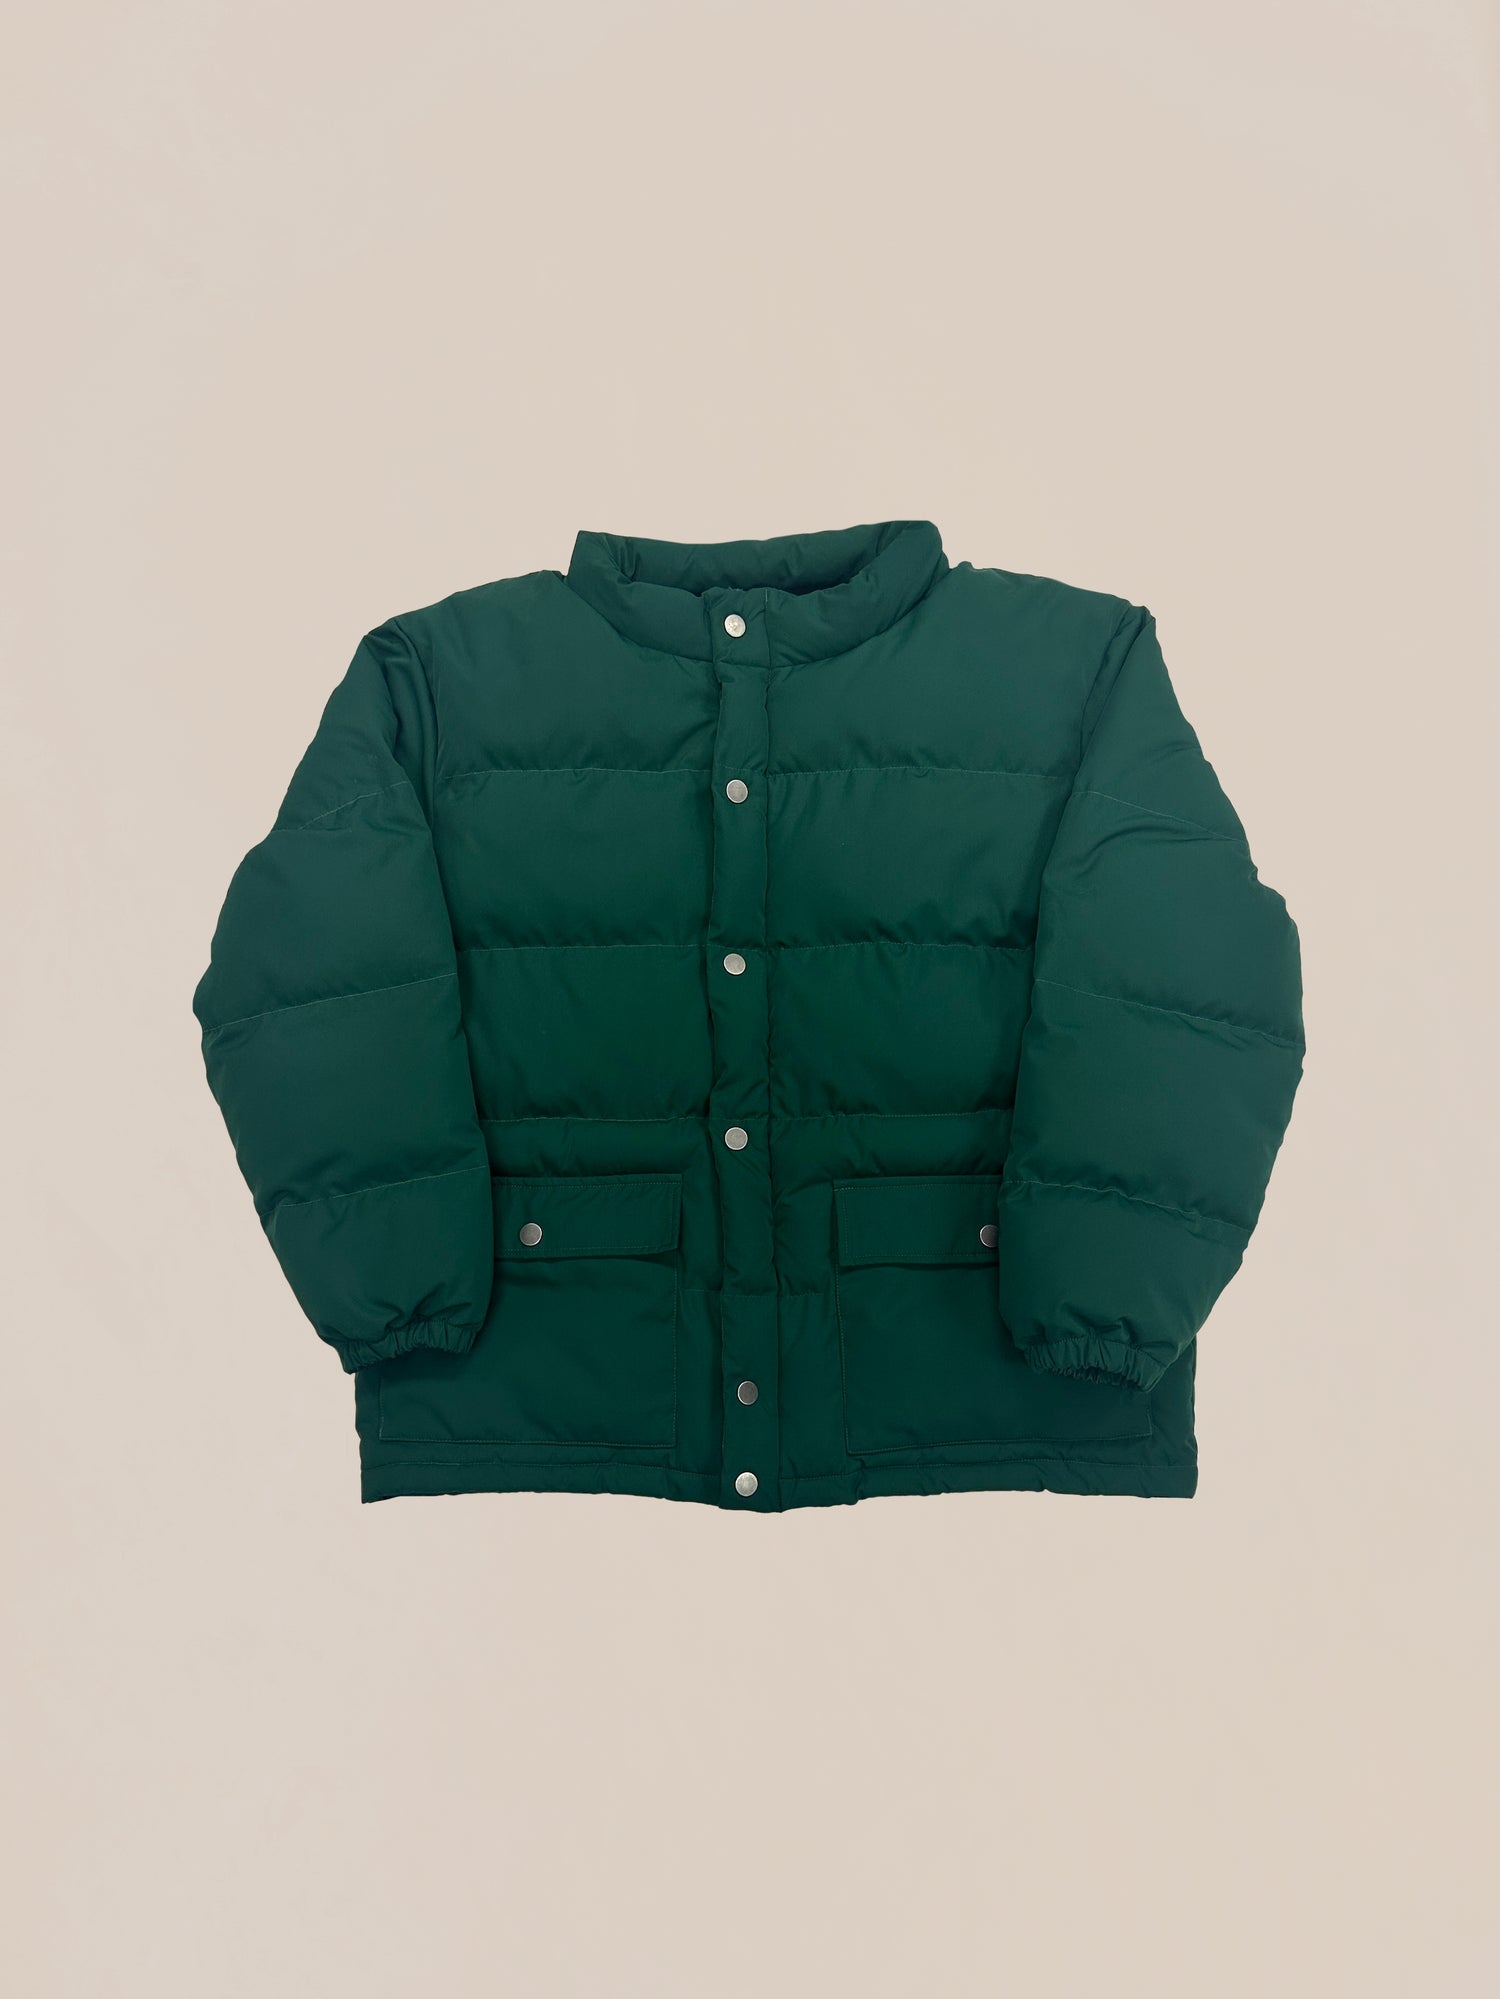 Sample 69 (Laurel Pine Puffer Jacket) by Profound displayed on a neutral background.